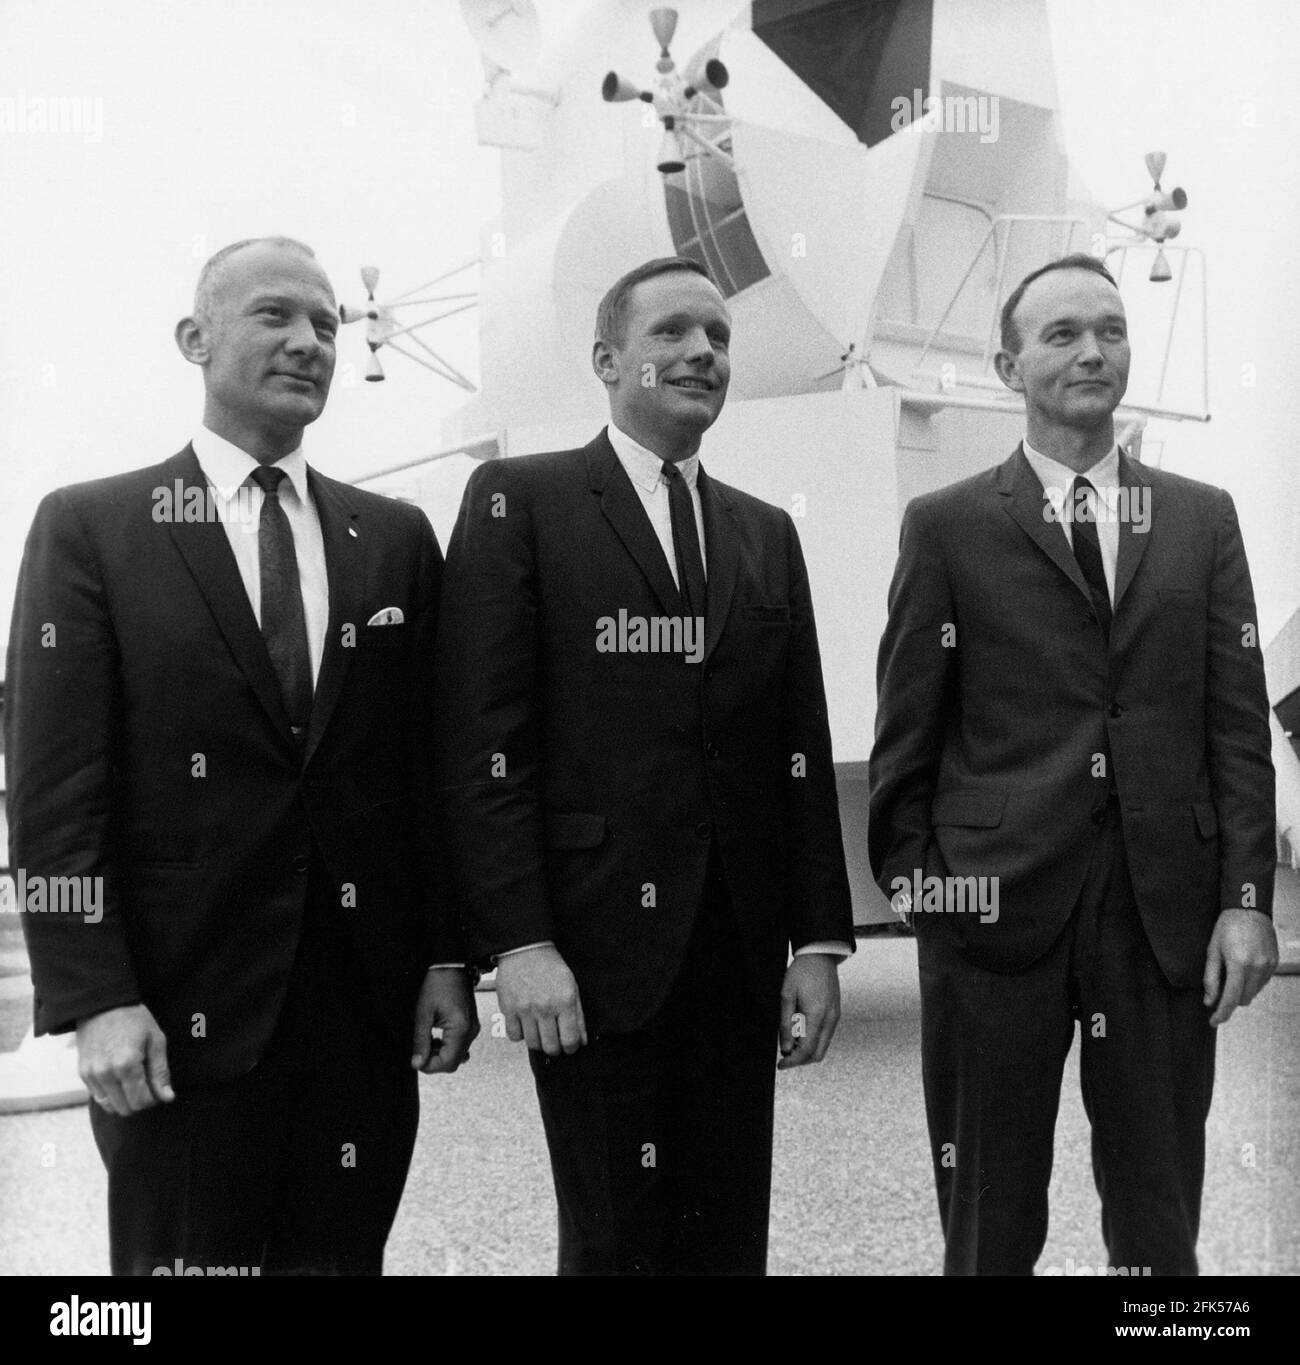 File photo - Cape Canaveral, FL - -- Apollo 11 Astronauts, left-to-right, Edwin E. 'Buzz' Aldrin, Jr., Neil A. Armstrong, and Michael Collins, pose in front of full-scale lunar module mock-up similar to the spacecraft that took them to the Moon on February 28, 1969.. --- American astronaut Michael Collins, who flew the Apollo 11 command module while his crewmates became the first people to land on the Moon on July 20, 1969, died on Wednesday after battling cancer, his family said. Photo by NASA via CNP /ABACAPRESS.COM Stock Photo